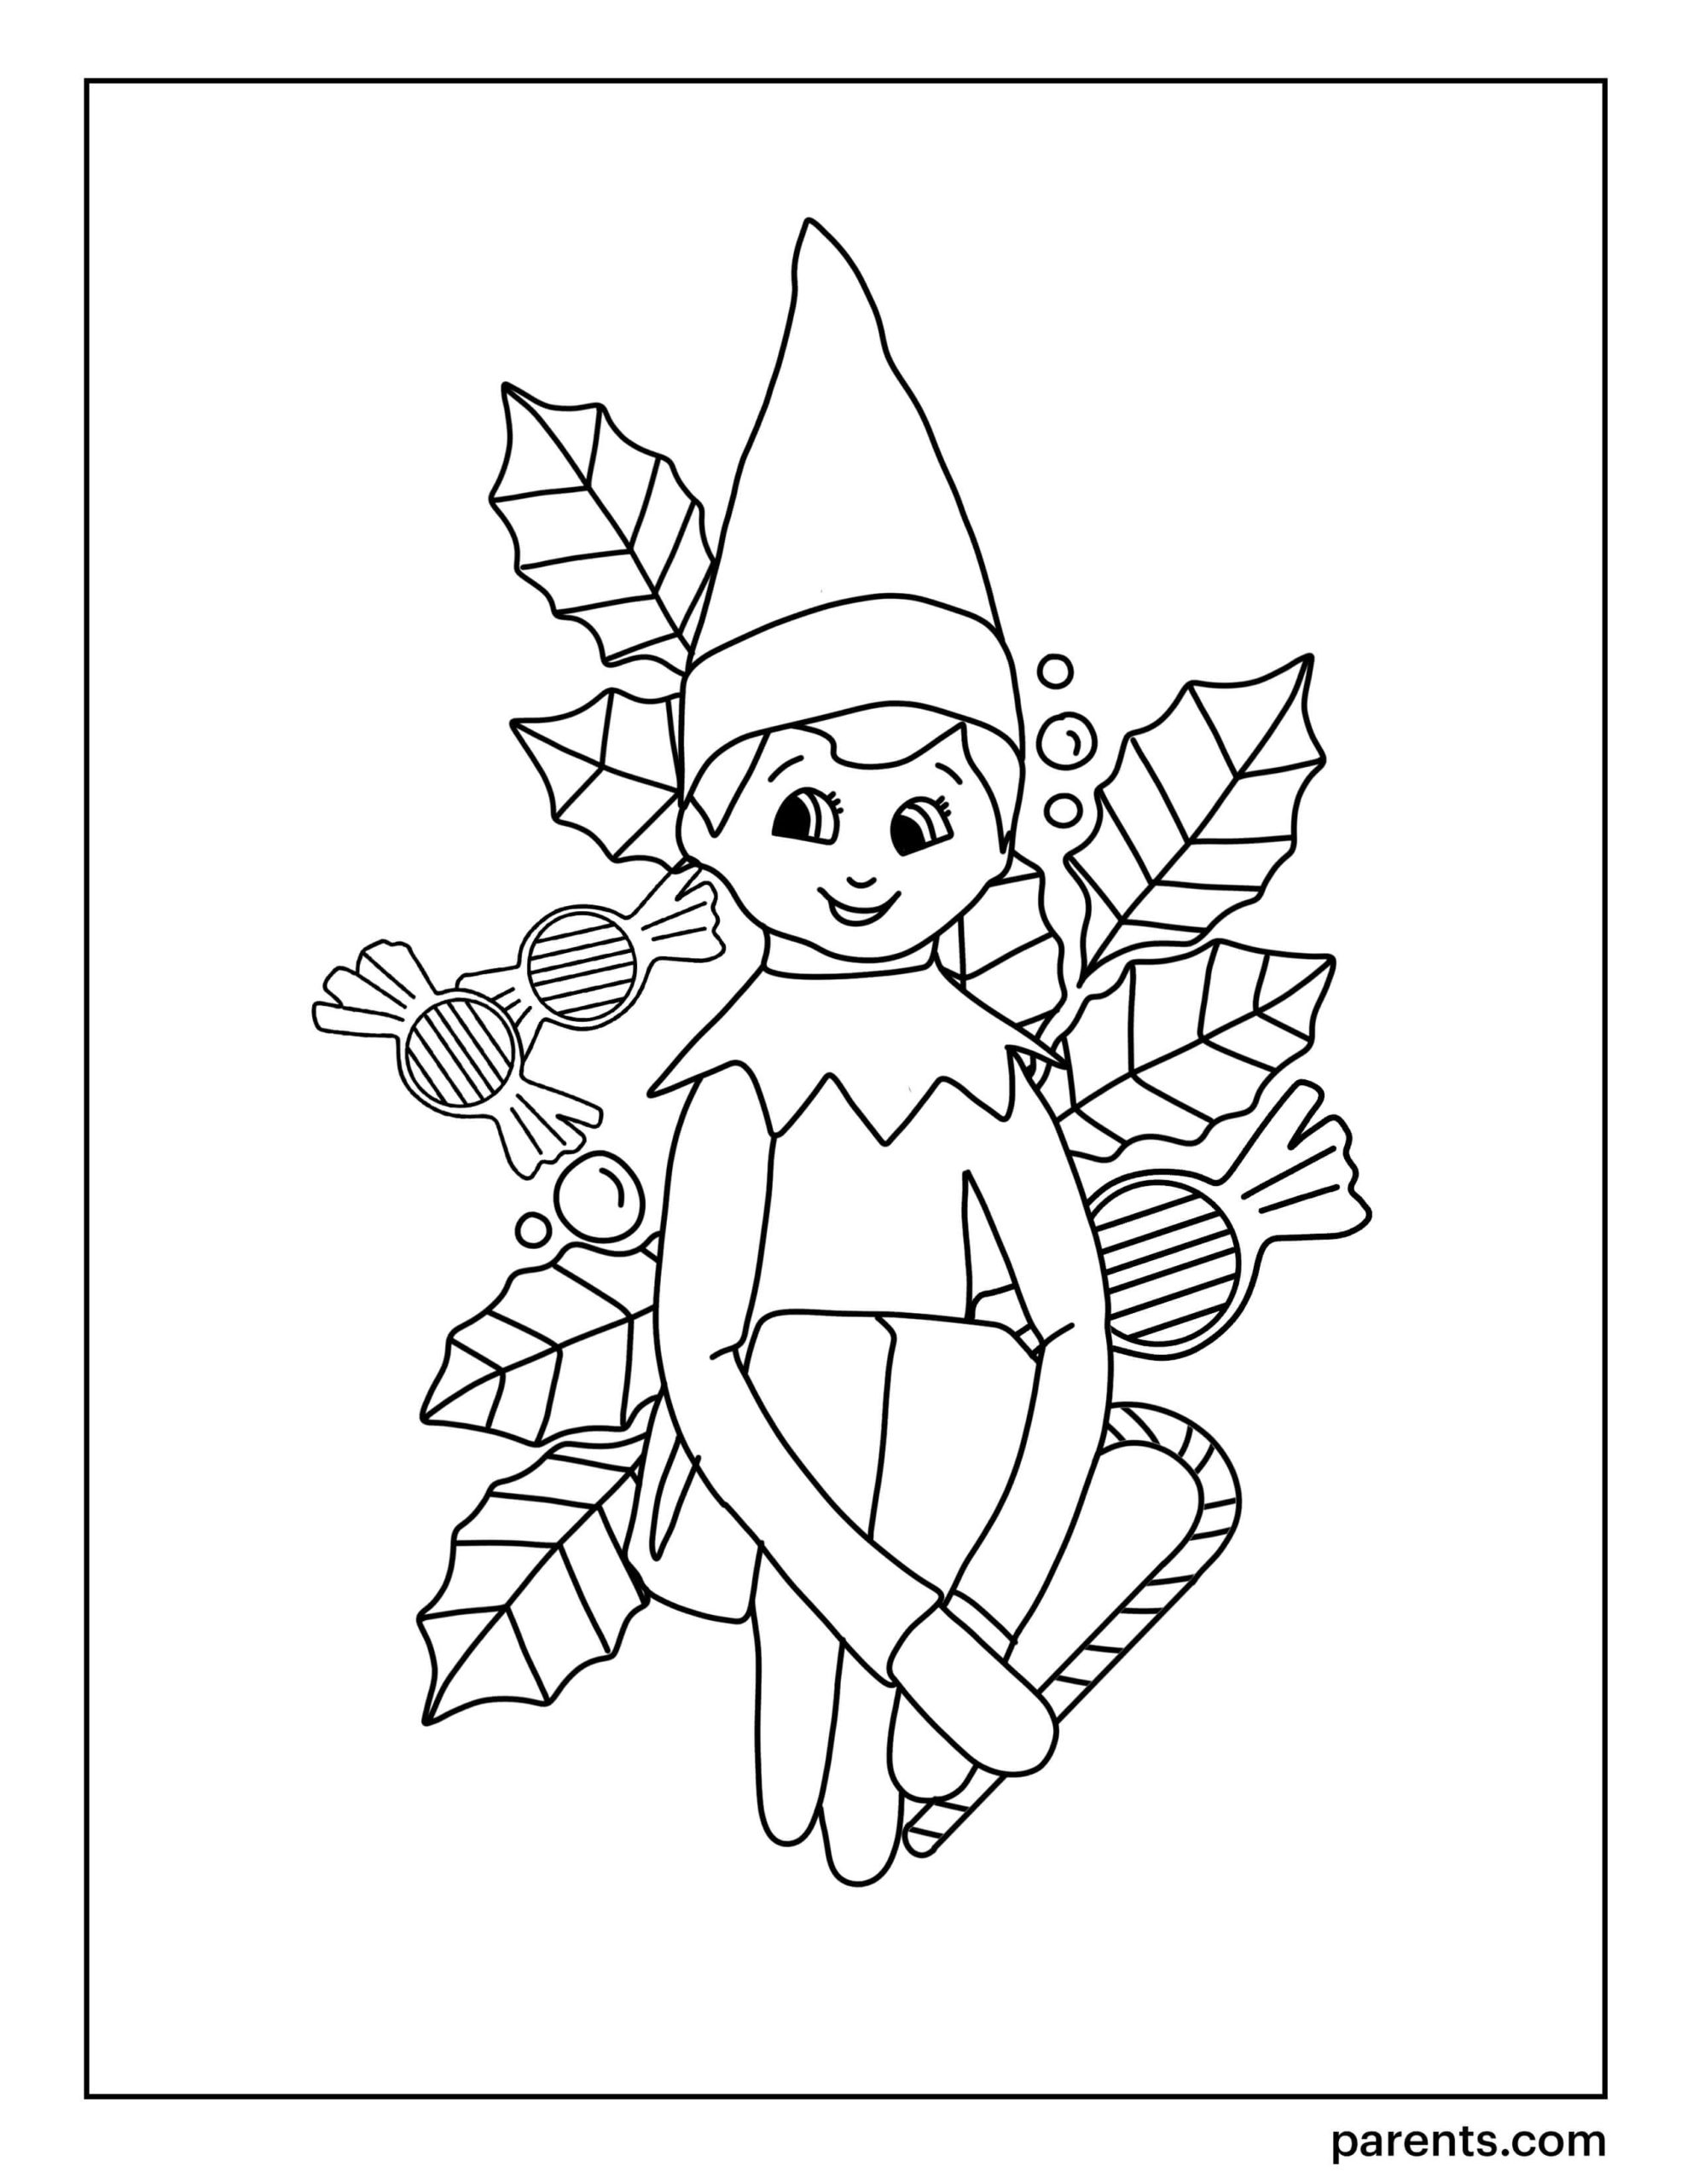 17 Printable Elf Coloring Pages to Enjoy the Holidays - Happier Human